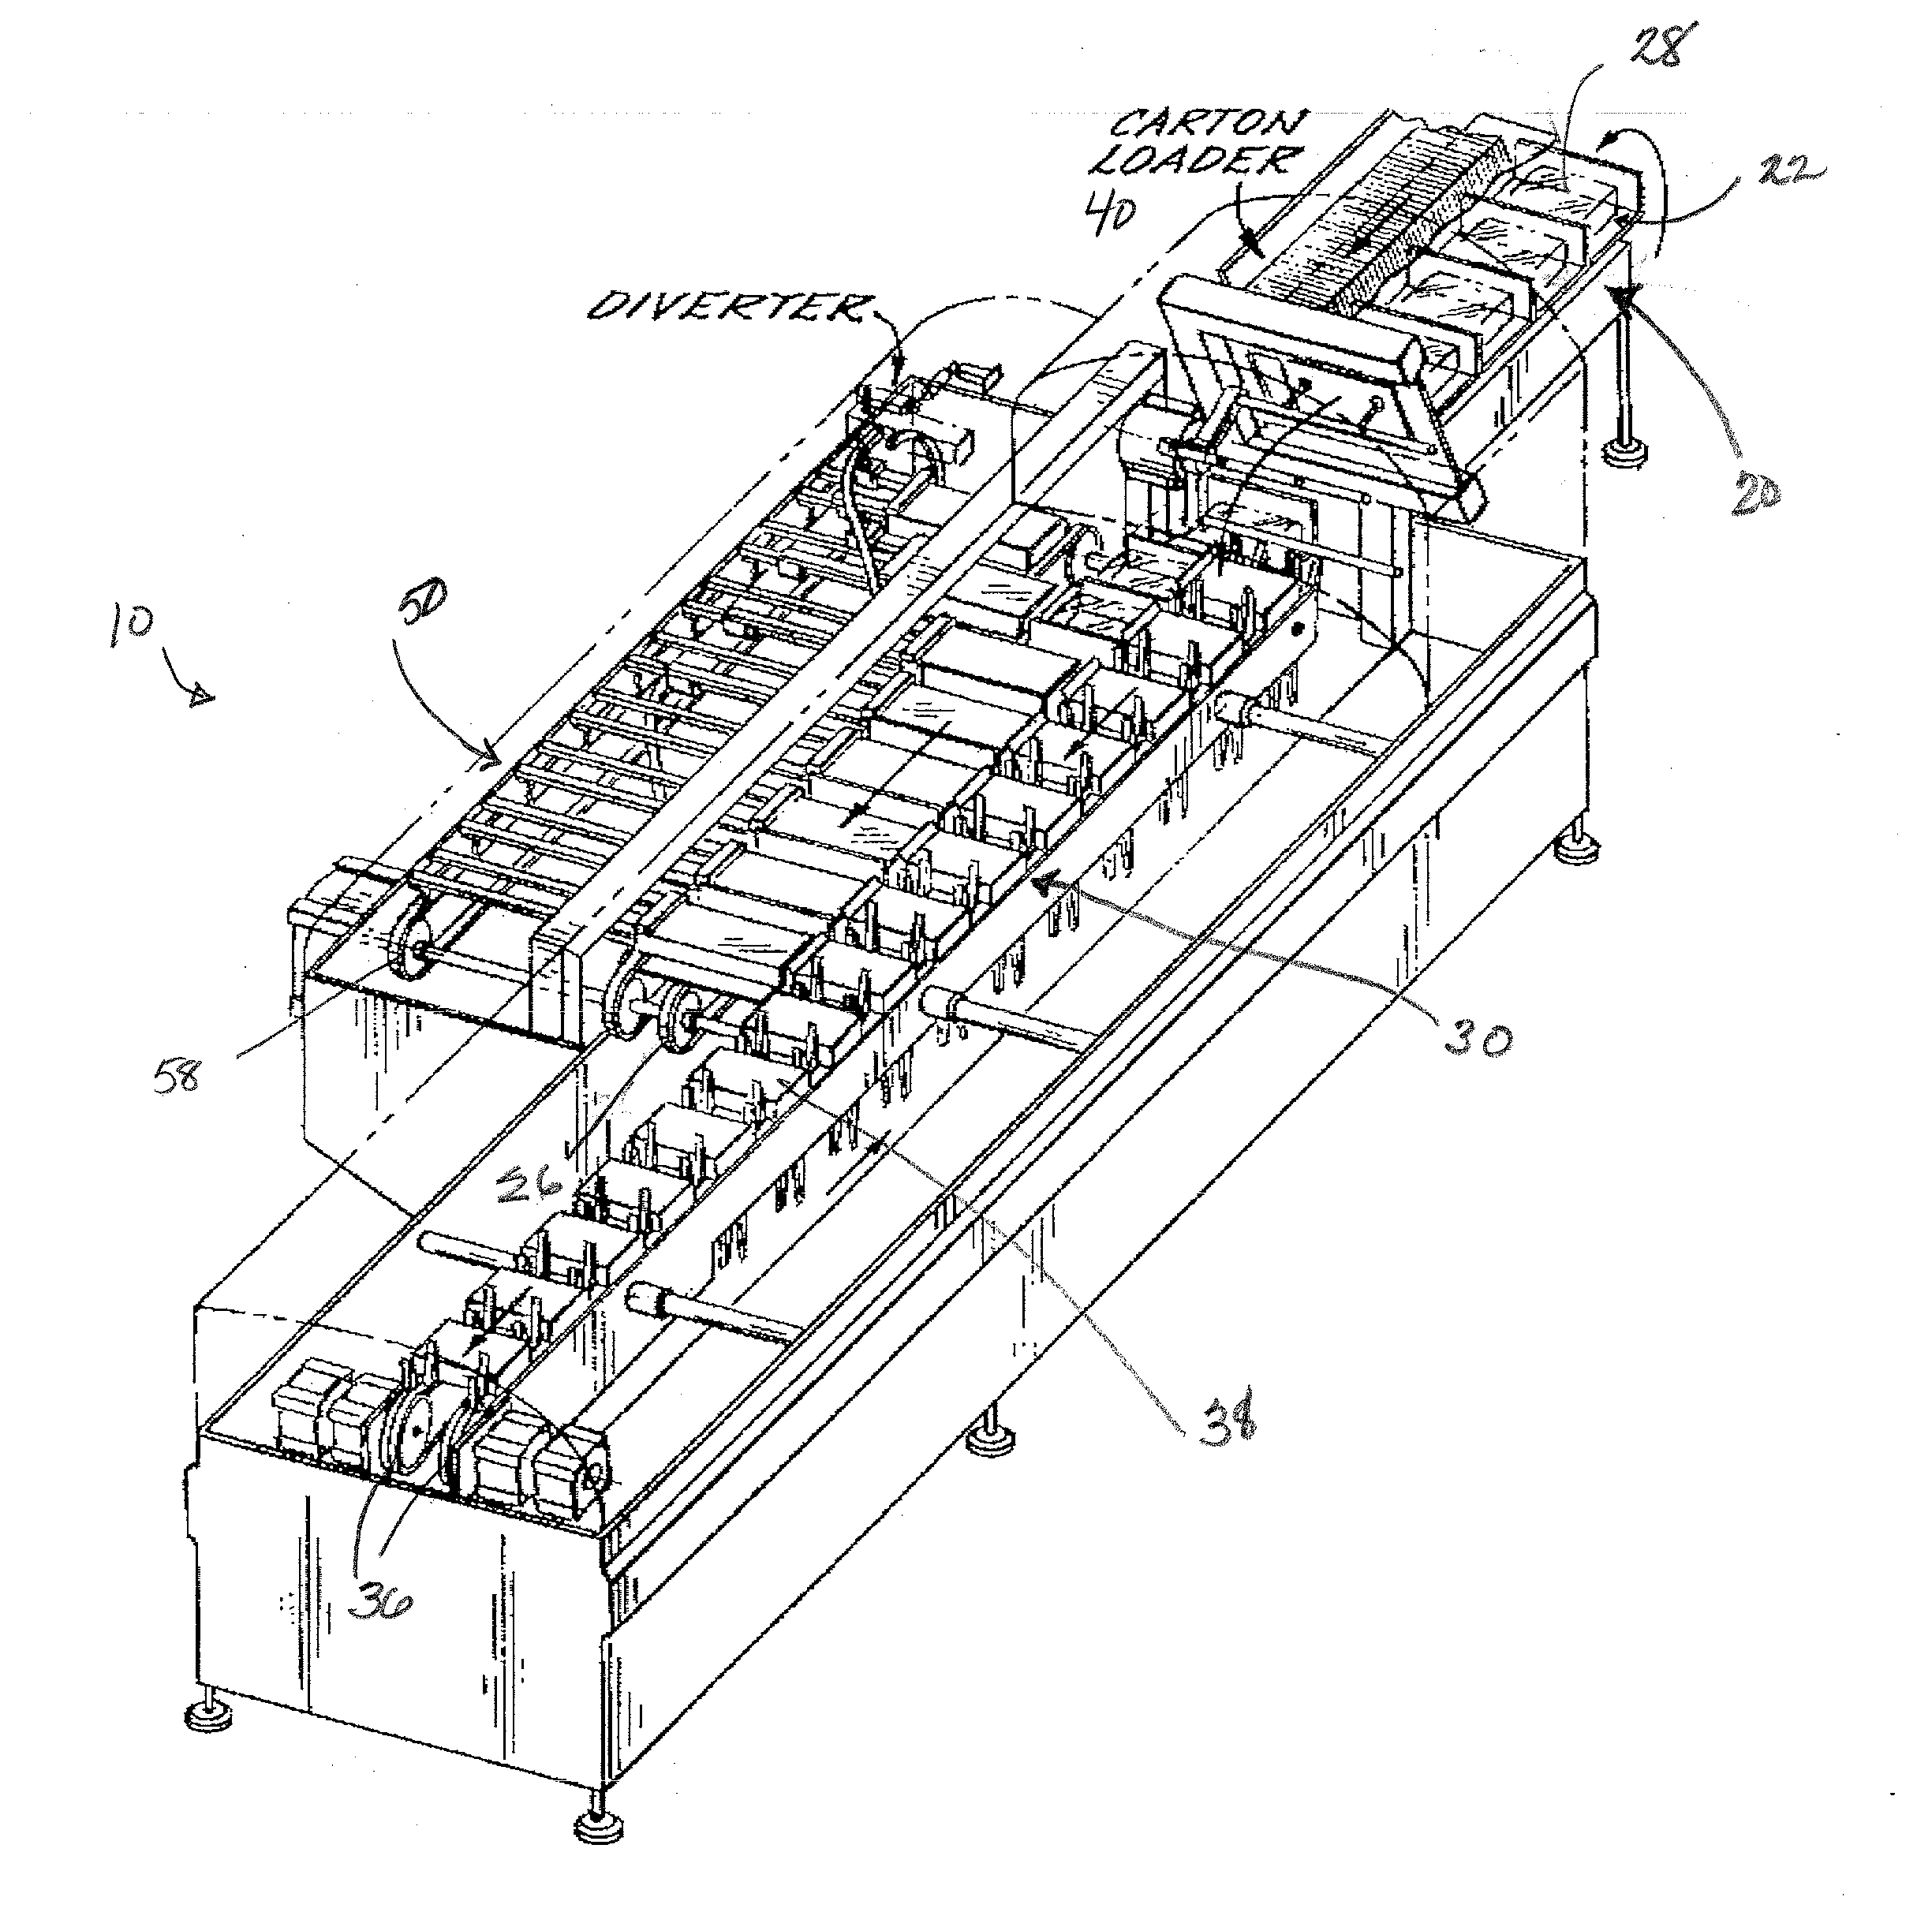 Integrated Barrel Loader and Confiner Apparatus for Use in a Cartoning System